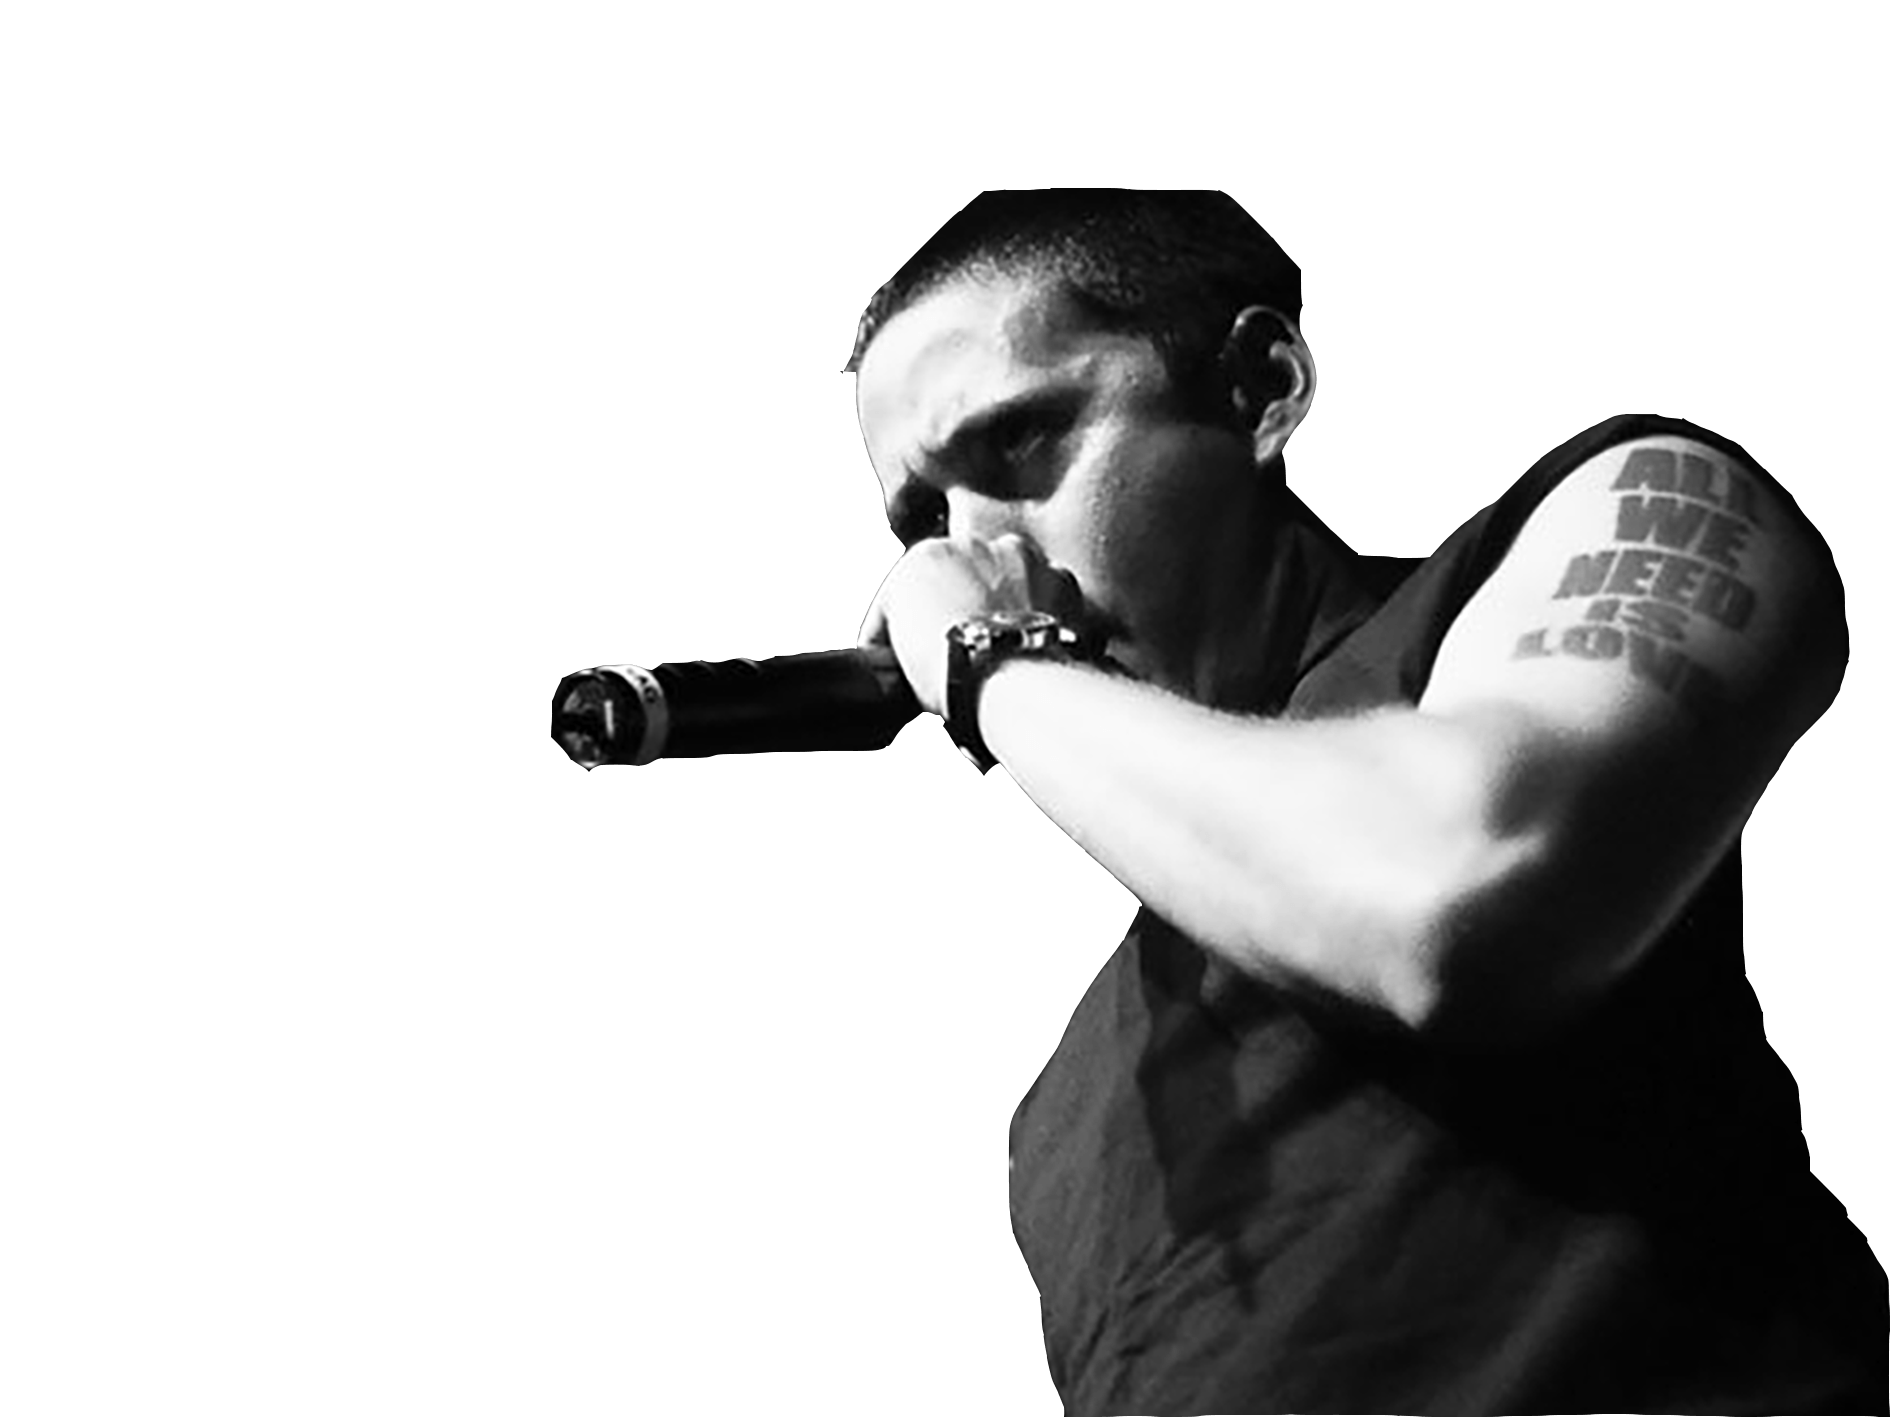 Wallpapers canserbero